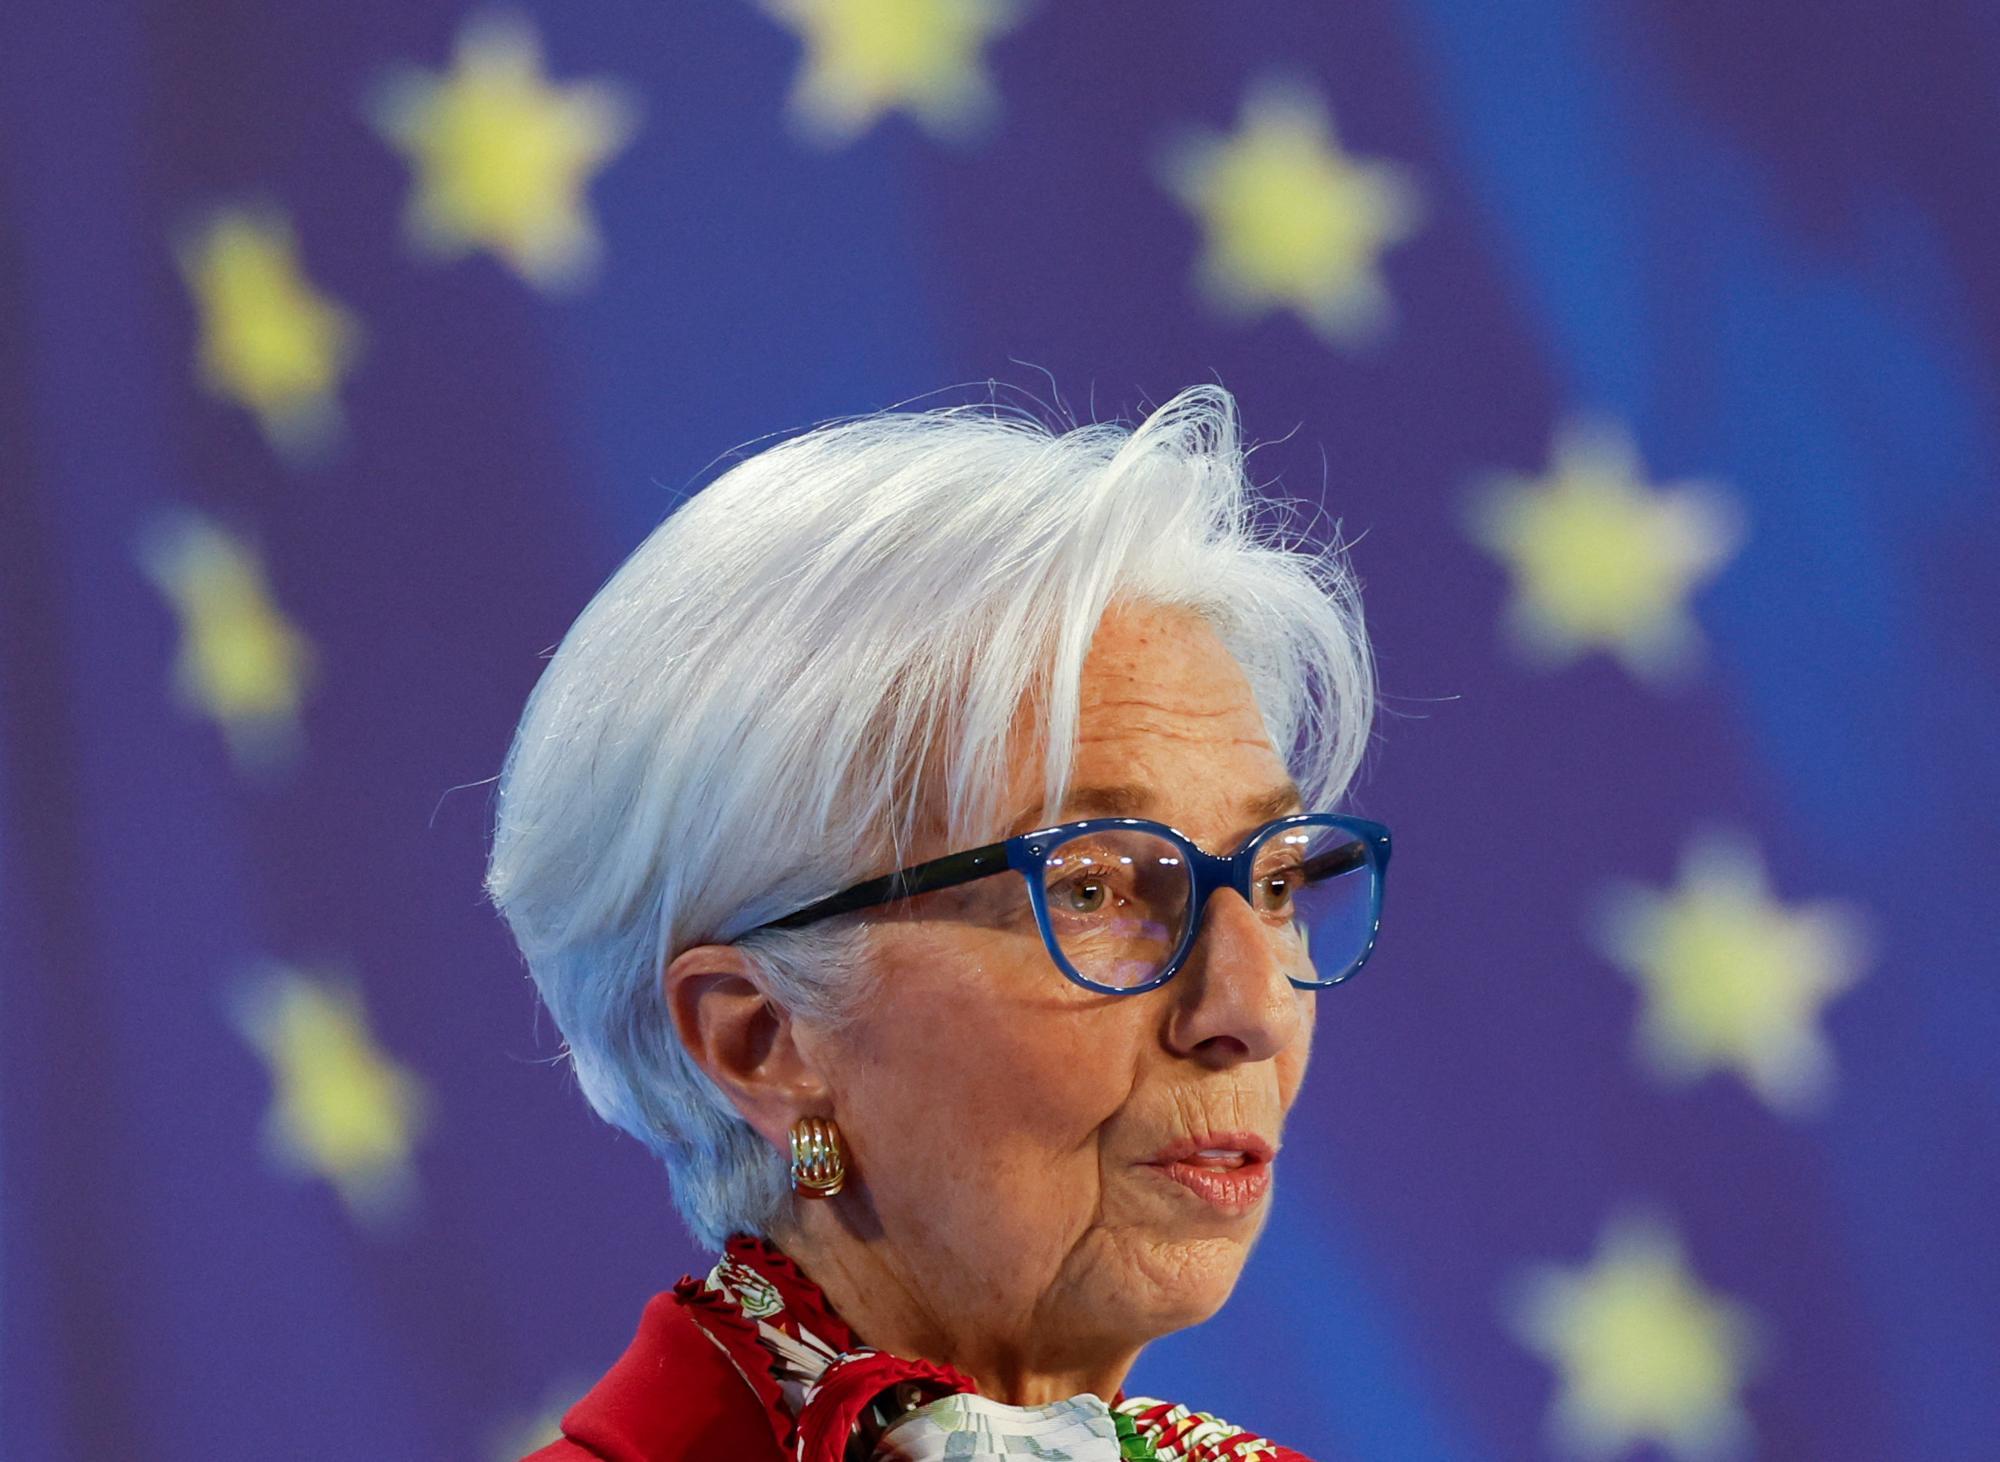 ECB President Lagarde attends a news conference following the ECB's monetary policy meeting in Frankfurt